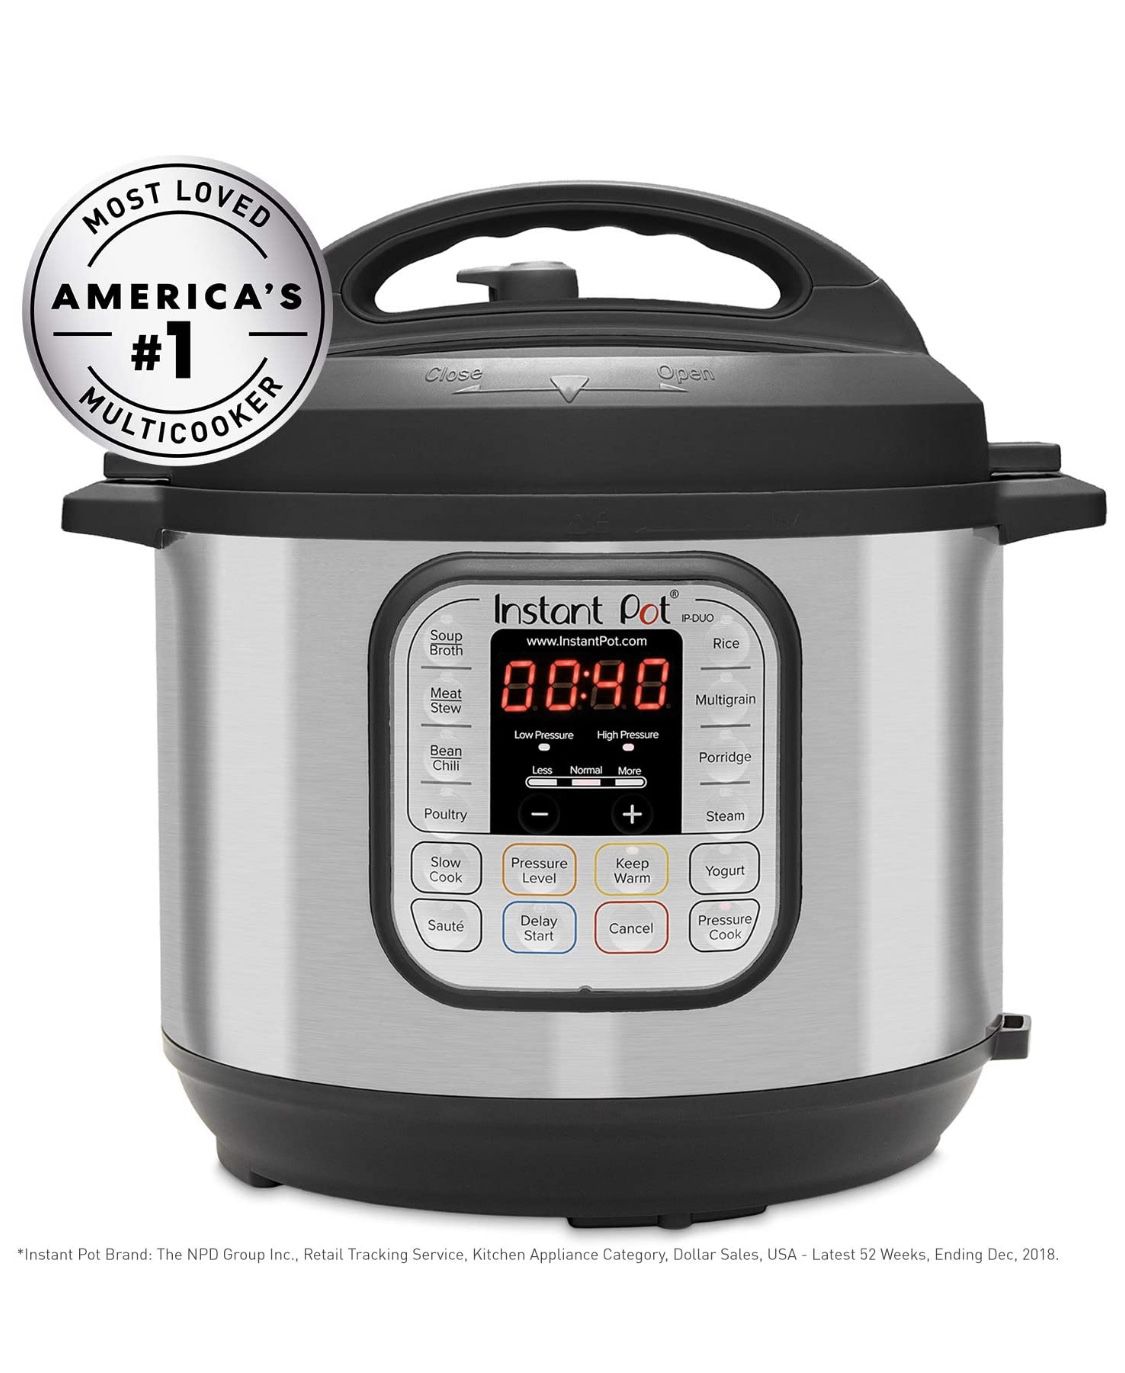 Power Cooker Digital Pressure Cooker PC-TR16 NEW for Sale in Raleigh, NC -  OfferUp